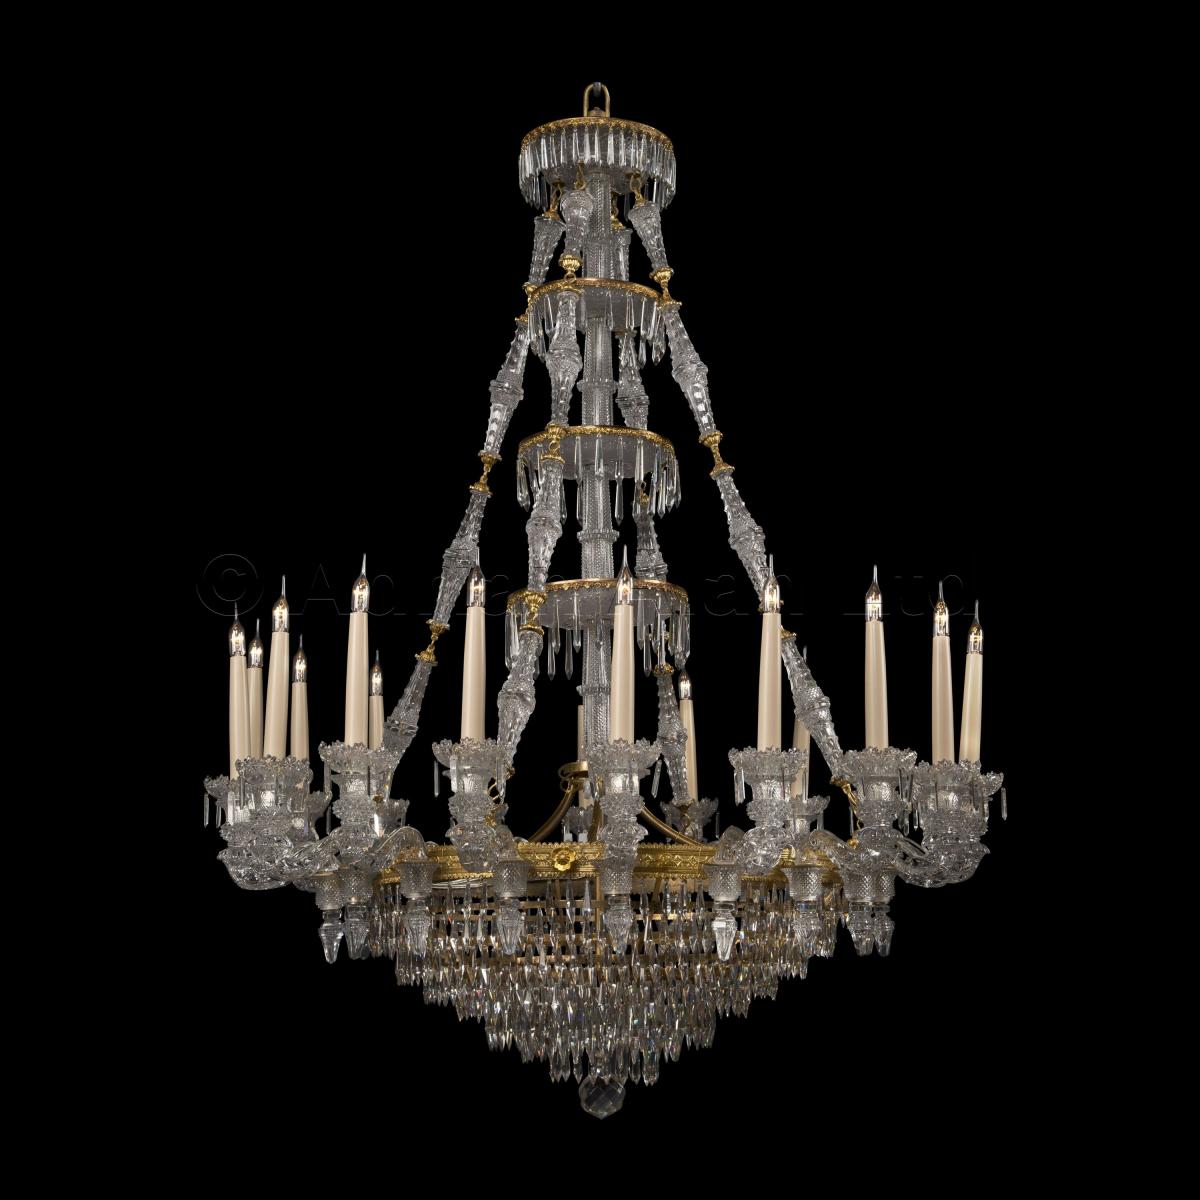 An Important Pair of Eighteen-Light Engraved Glass Chandeliers By Baccarat